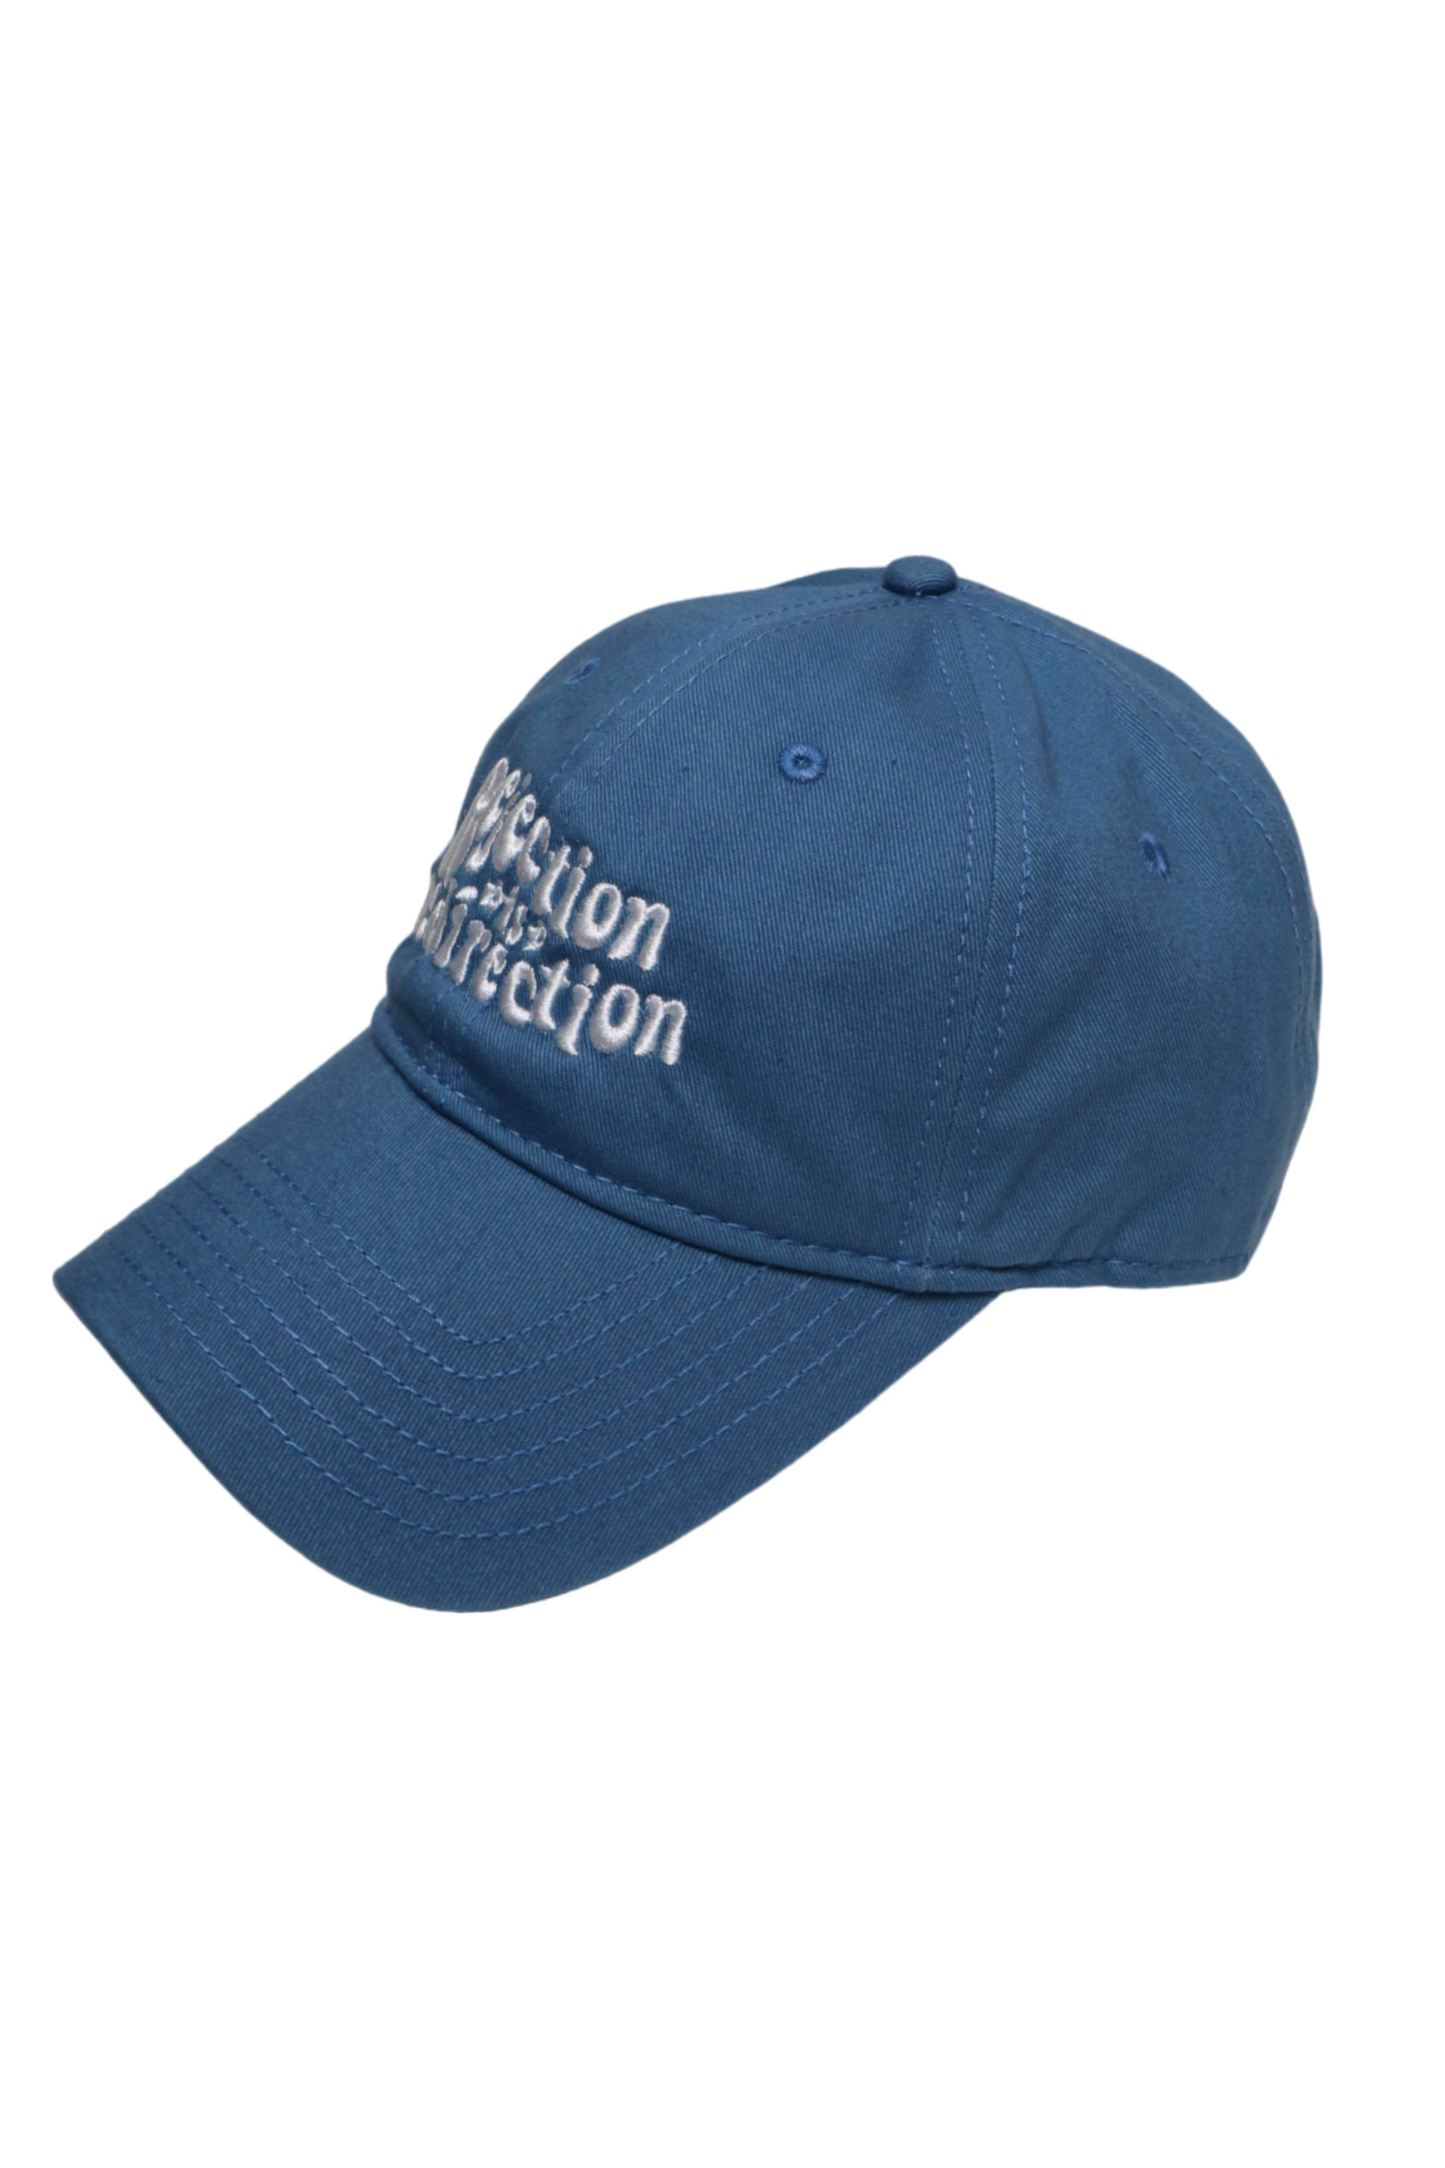 Rejection is Redirection Cap